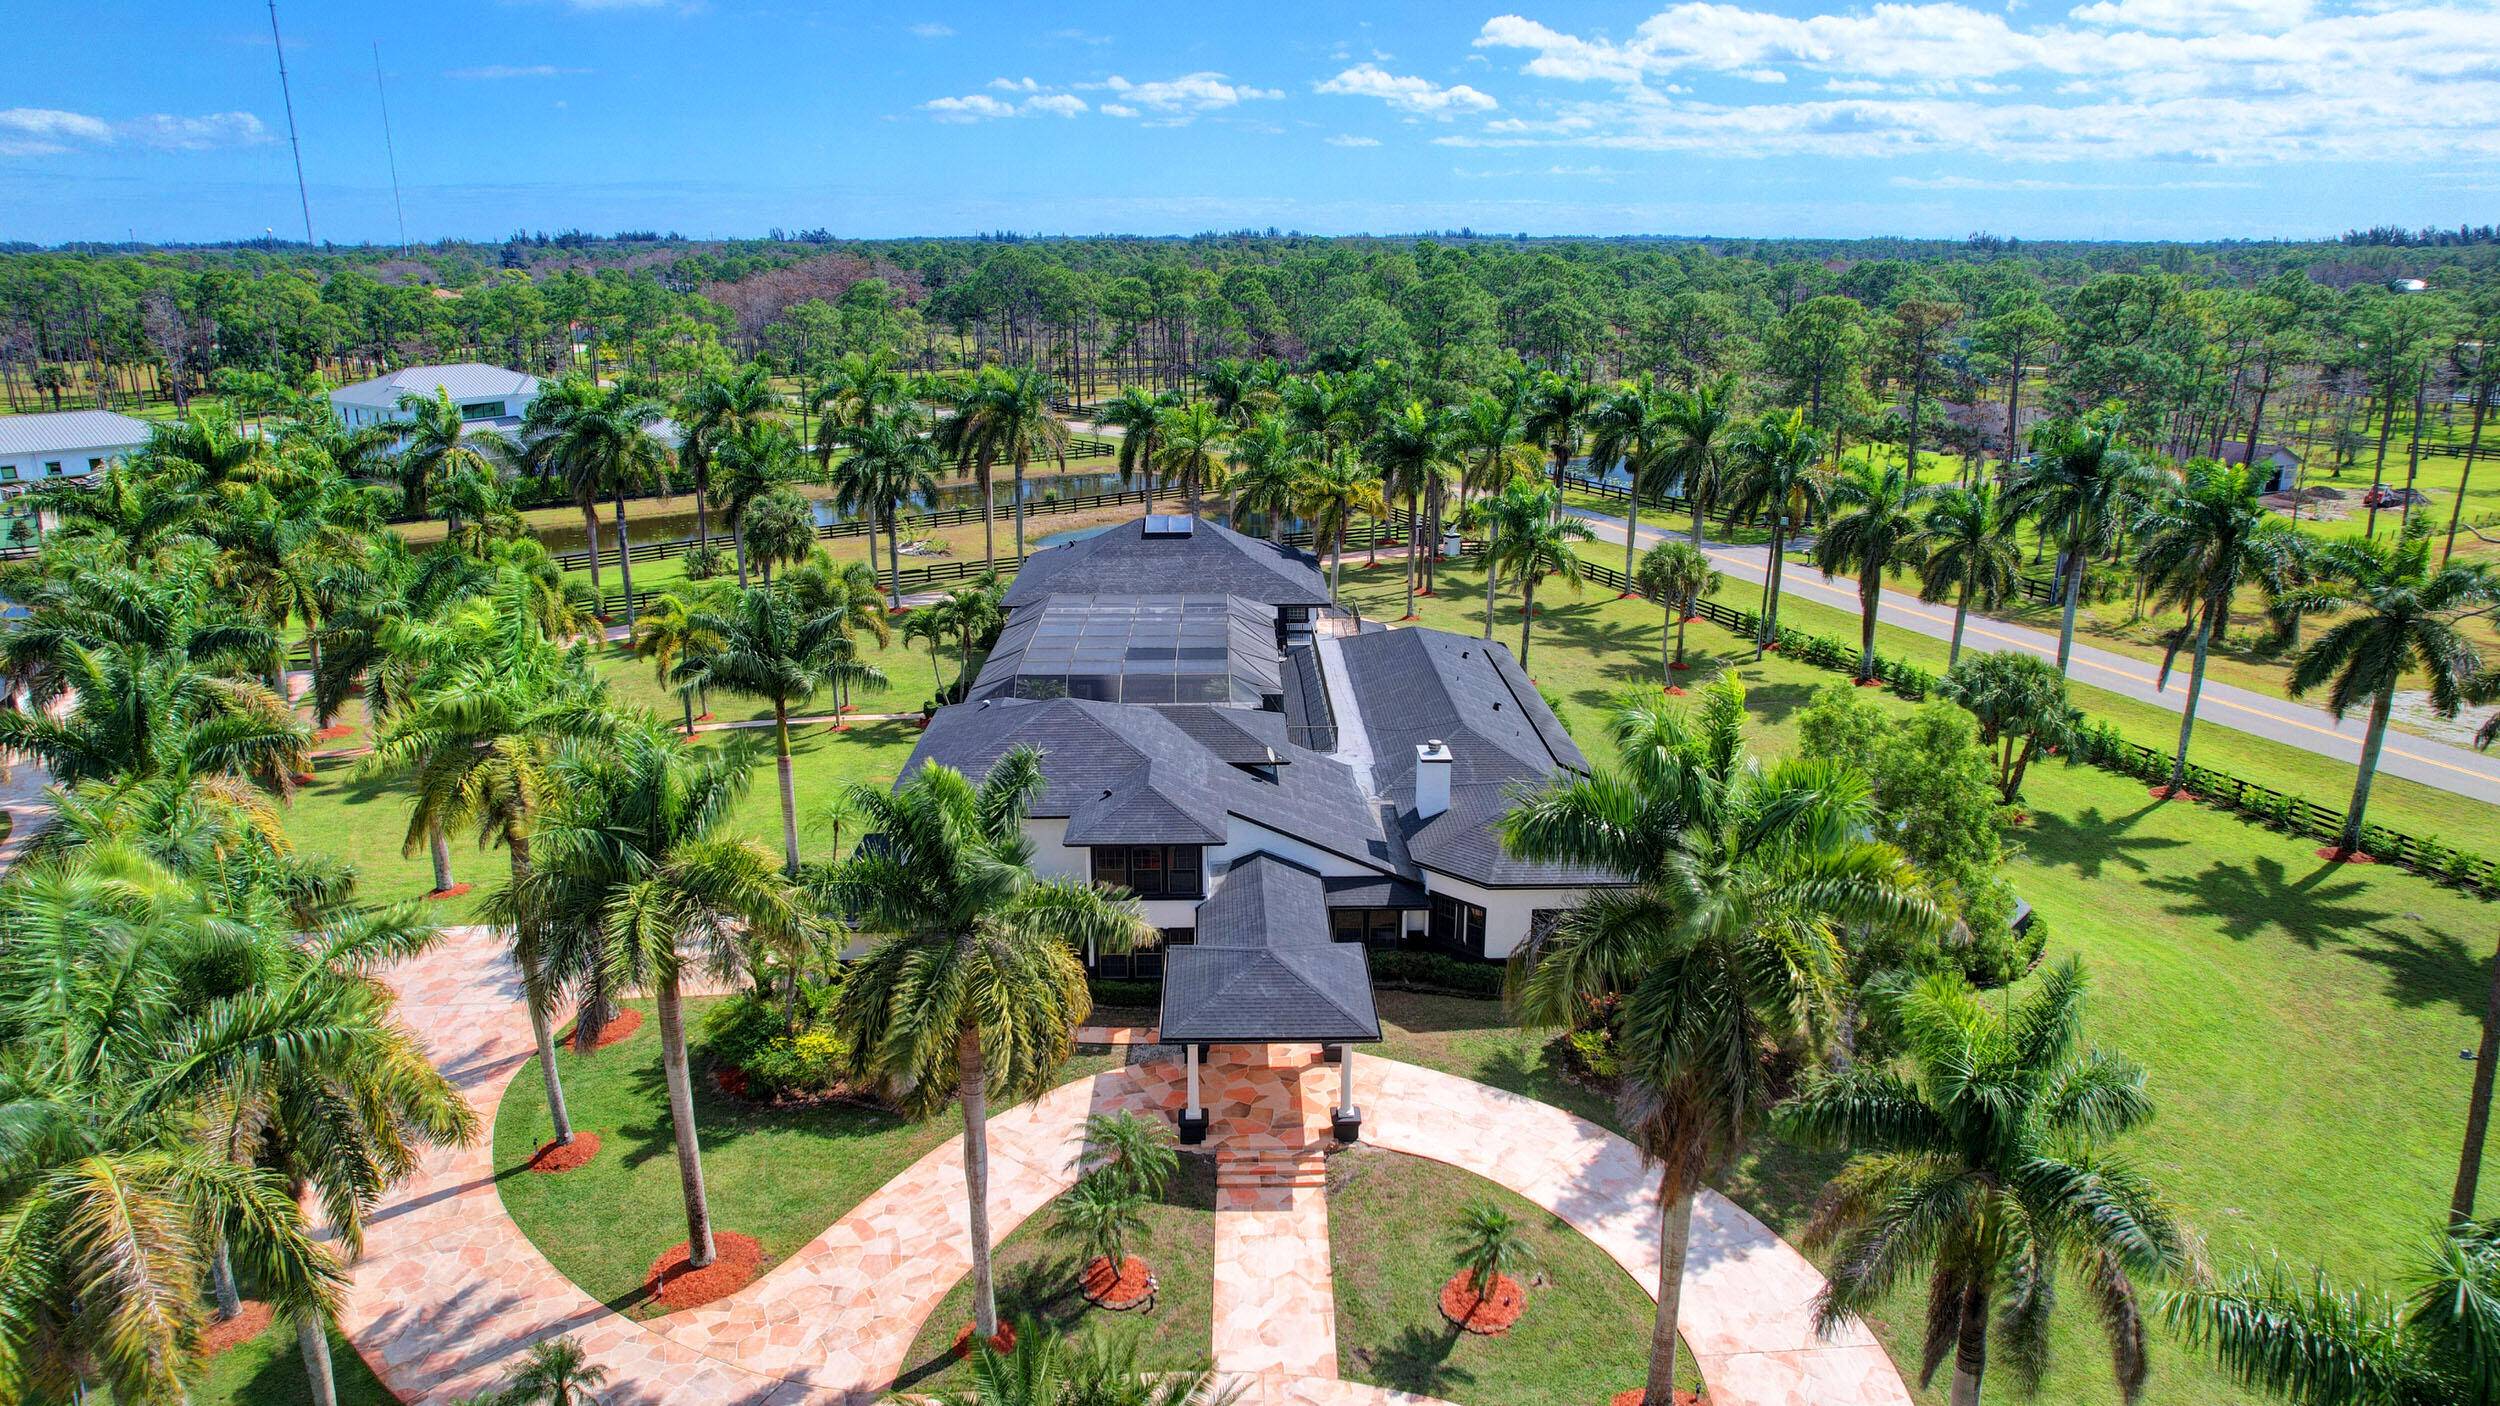 Luxurious Equestrian Estate is situated on 5 plus manicured acres nestled among lush tropical landscape located in the prestigious gated community of Homeland with 24 Hour man security.